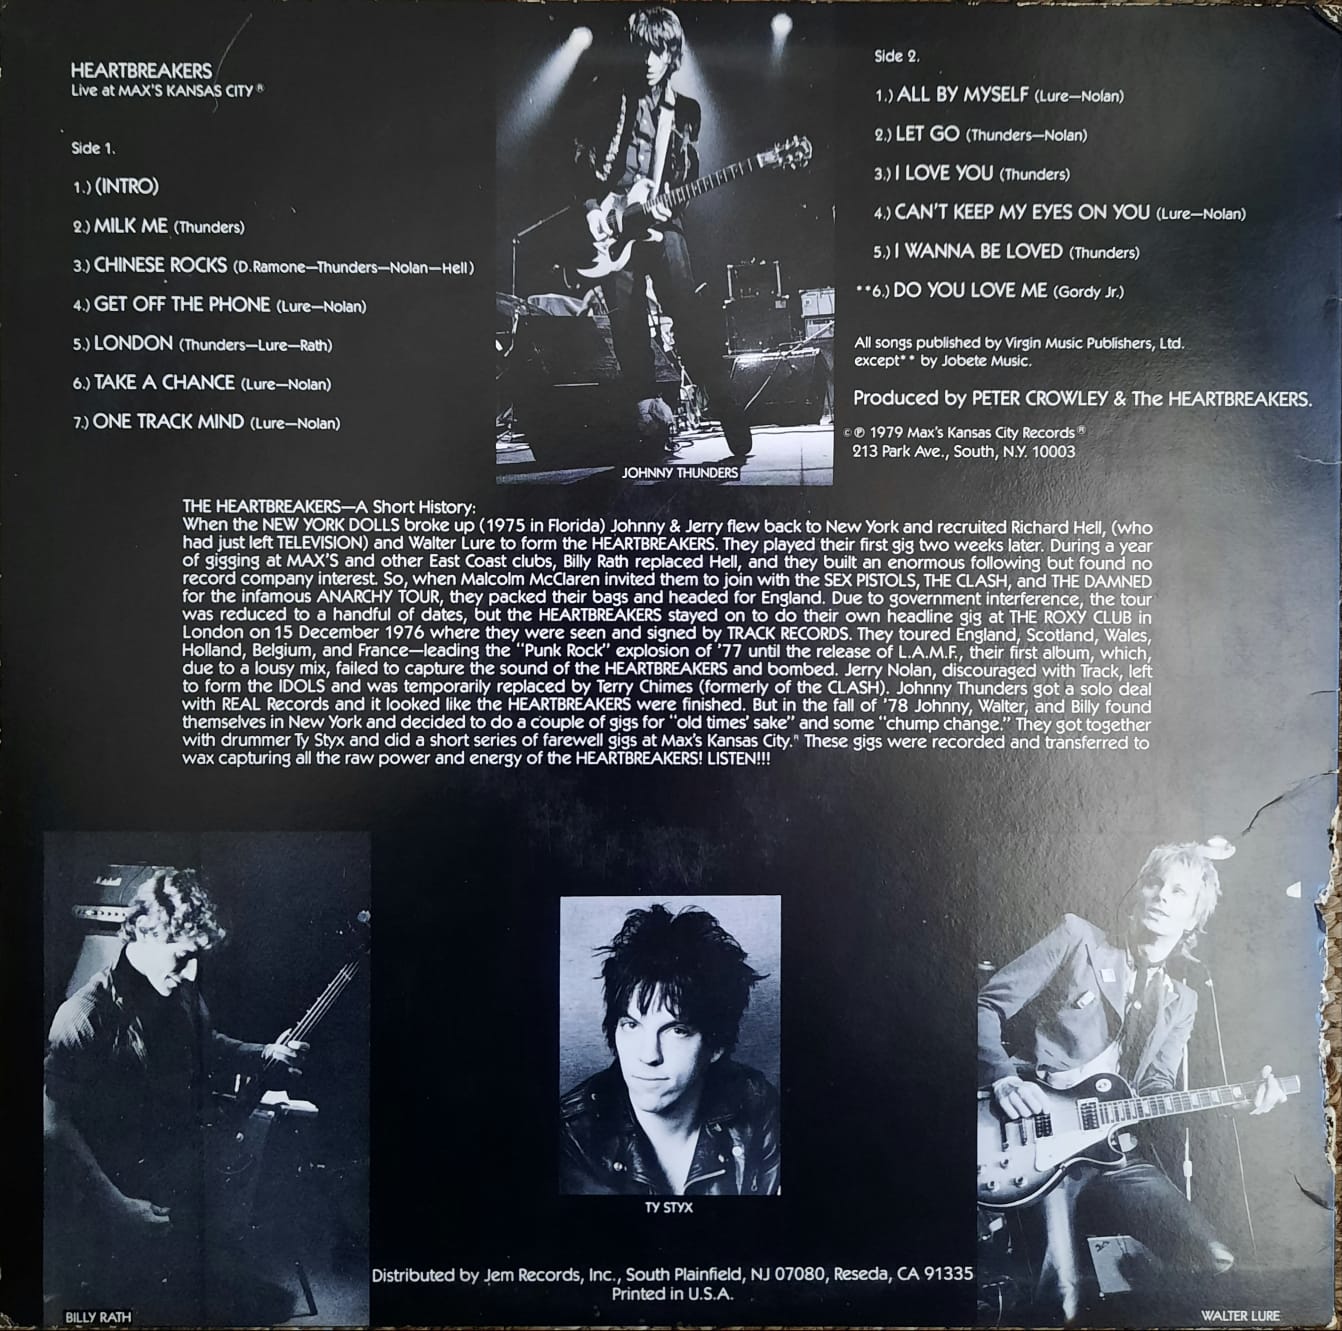 The Heartbreakers - Live At Max´s Kansas City (LP, EE.UU., 1979)